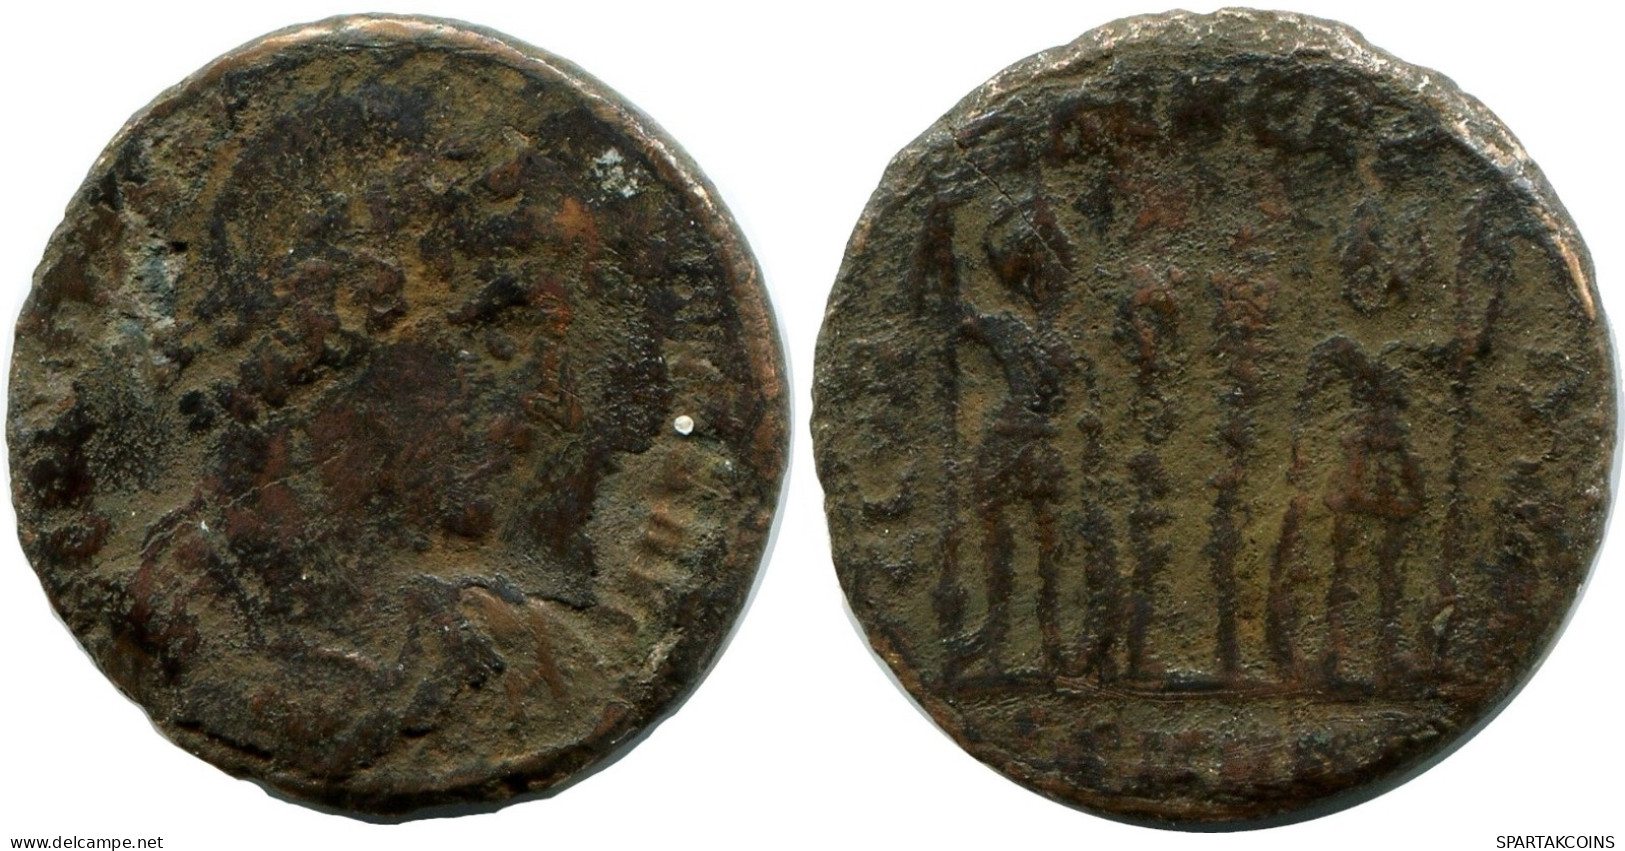 CONSTANTINE I MINTED IN HERACLEA FOUND IN IHNASYAH HOARD EGYPT #ANC11204.14.D.A - El Impero Christiano (307 / 363)